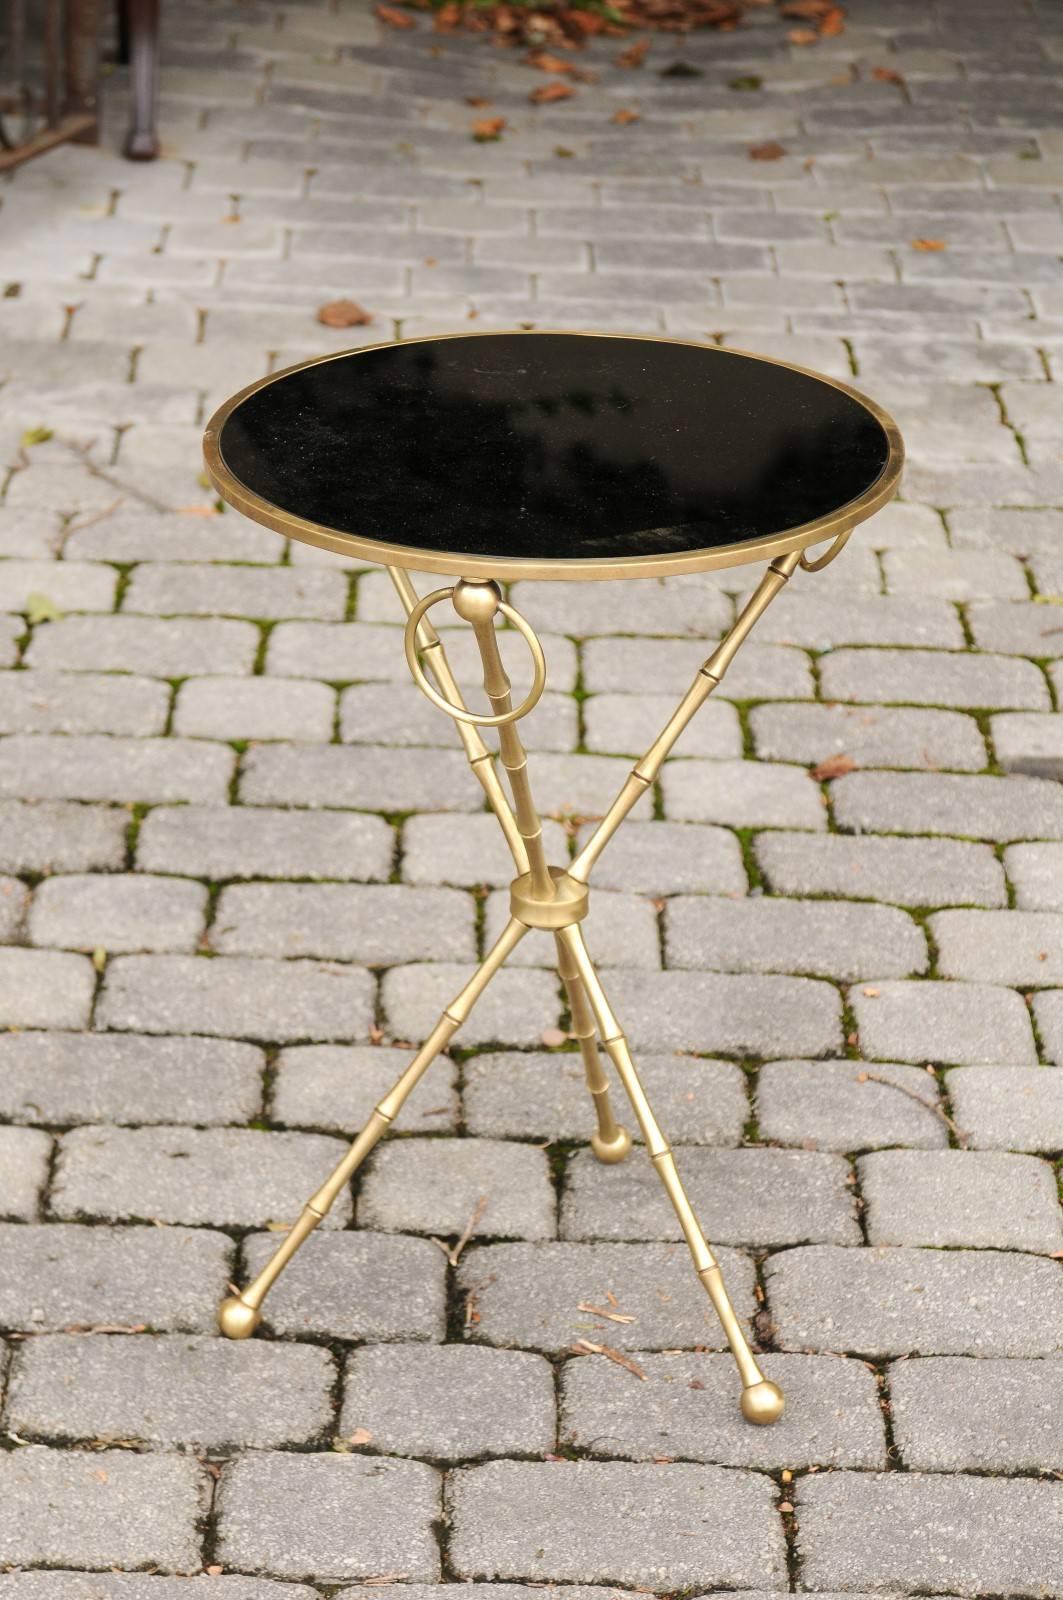 A French Maison Jansen style round side table with brass and black glass from the midcentury. This French side table was born in the 1940s and produced in the manner of Maison Jansen. The circular top is adorned with black glass, safely secured in a